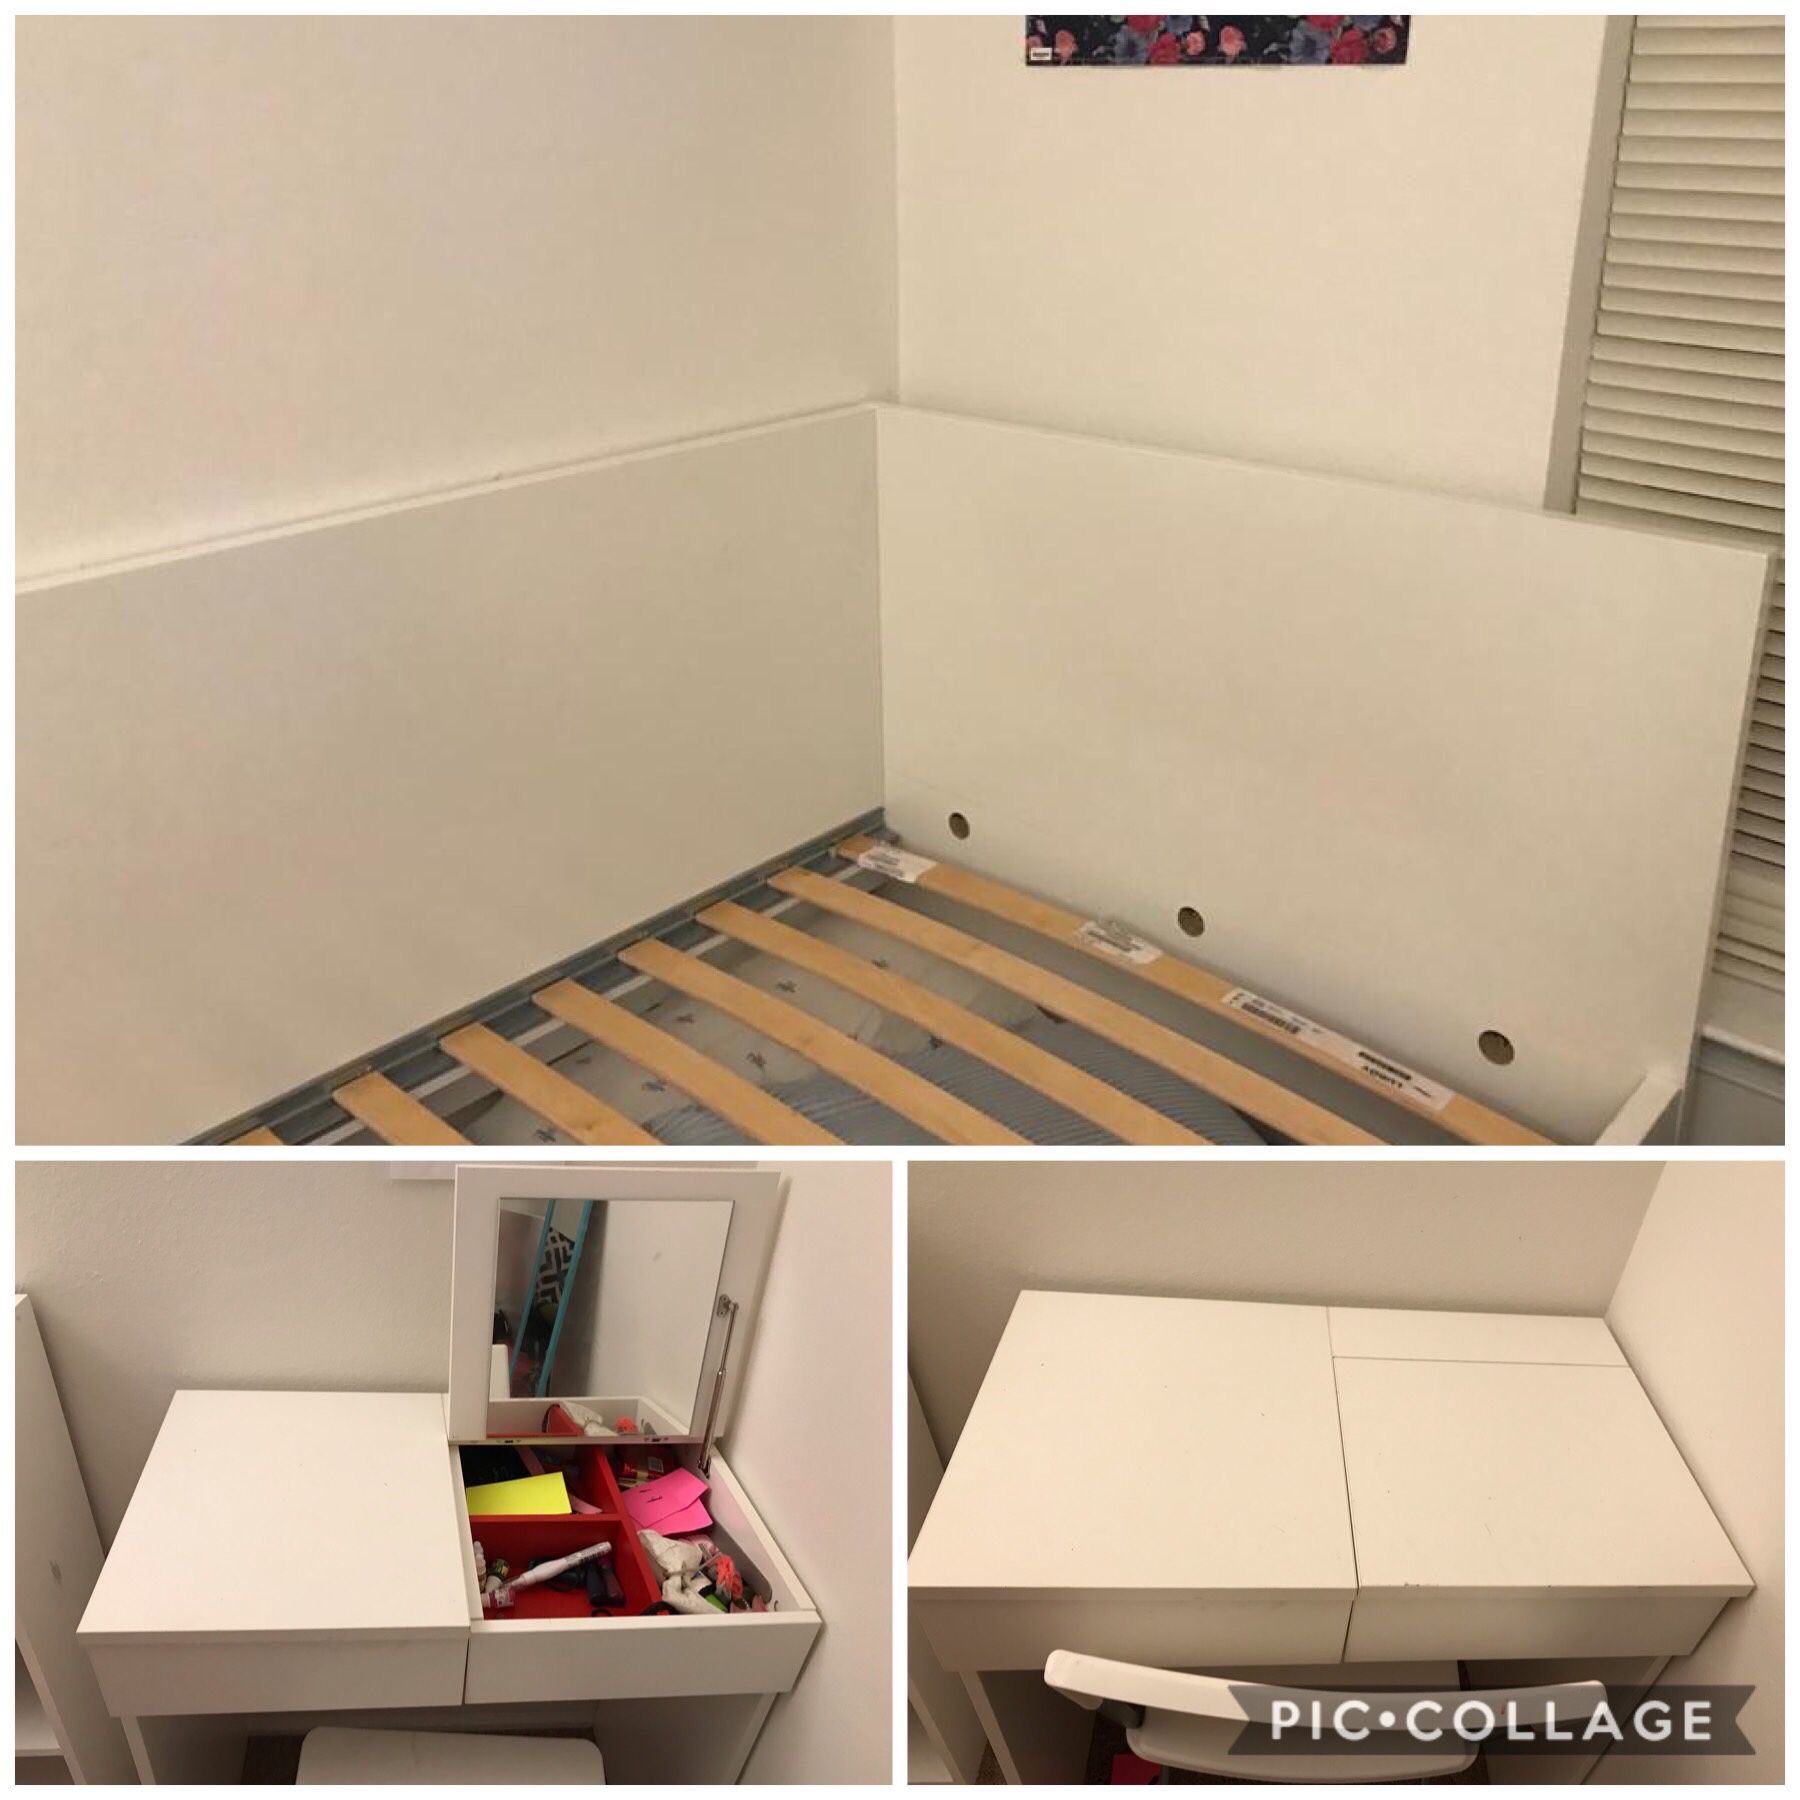 IKEA twin size bed+IKEA Dresser with chair